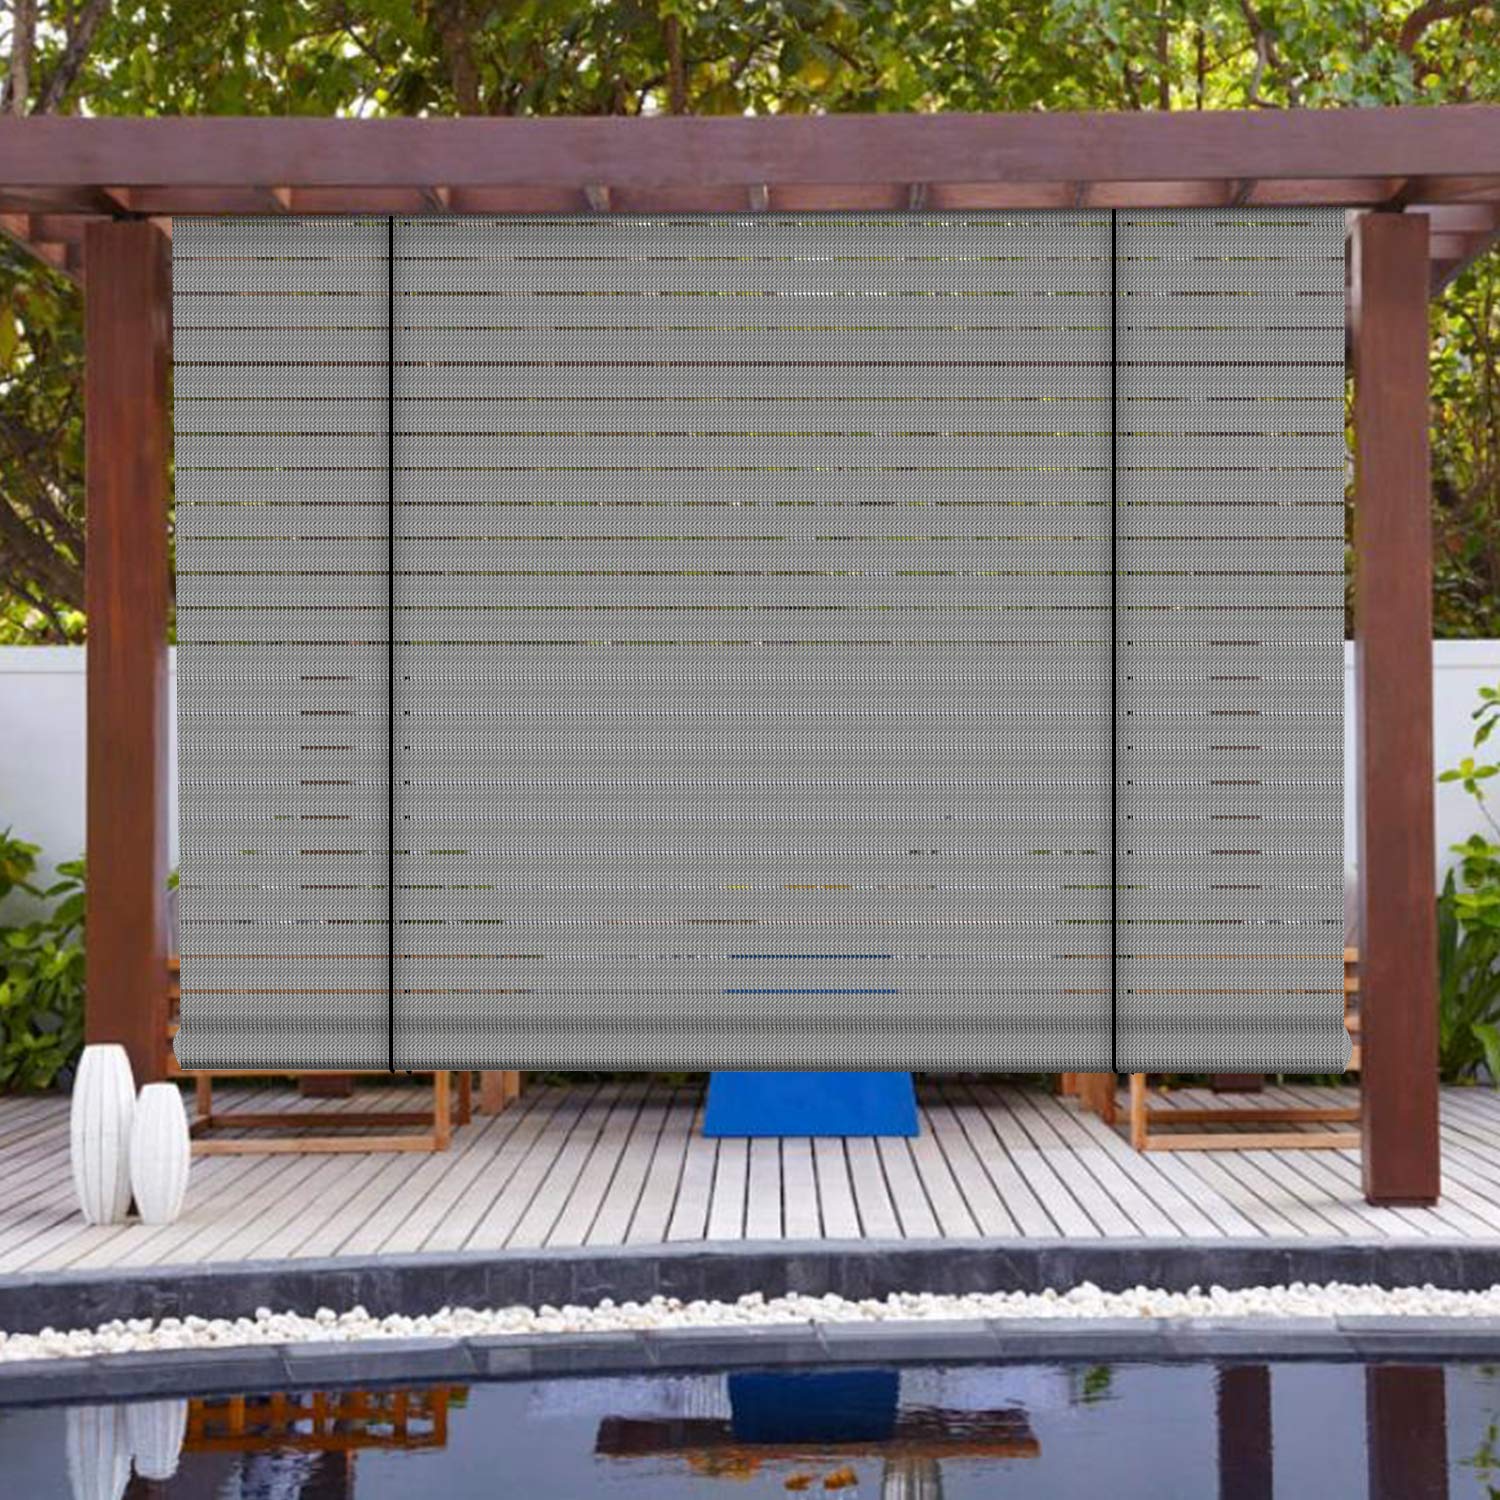 Patio Paradise Exterior Outdoor Roll Up Shades Blinds Roller Shade For Porch Deck Balcony Pergola Carport Light Filtering 5Wx125